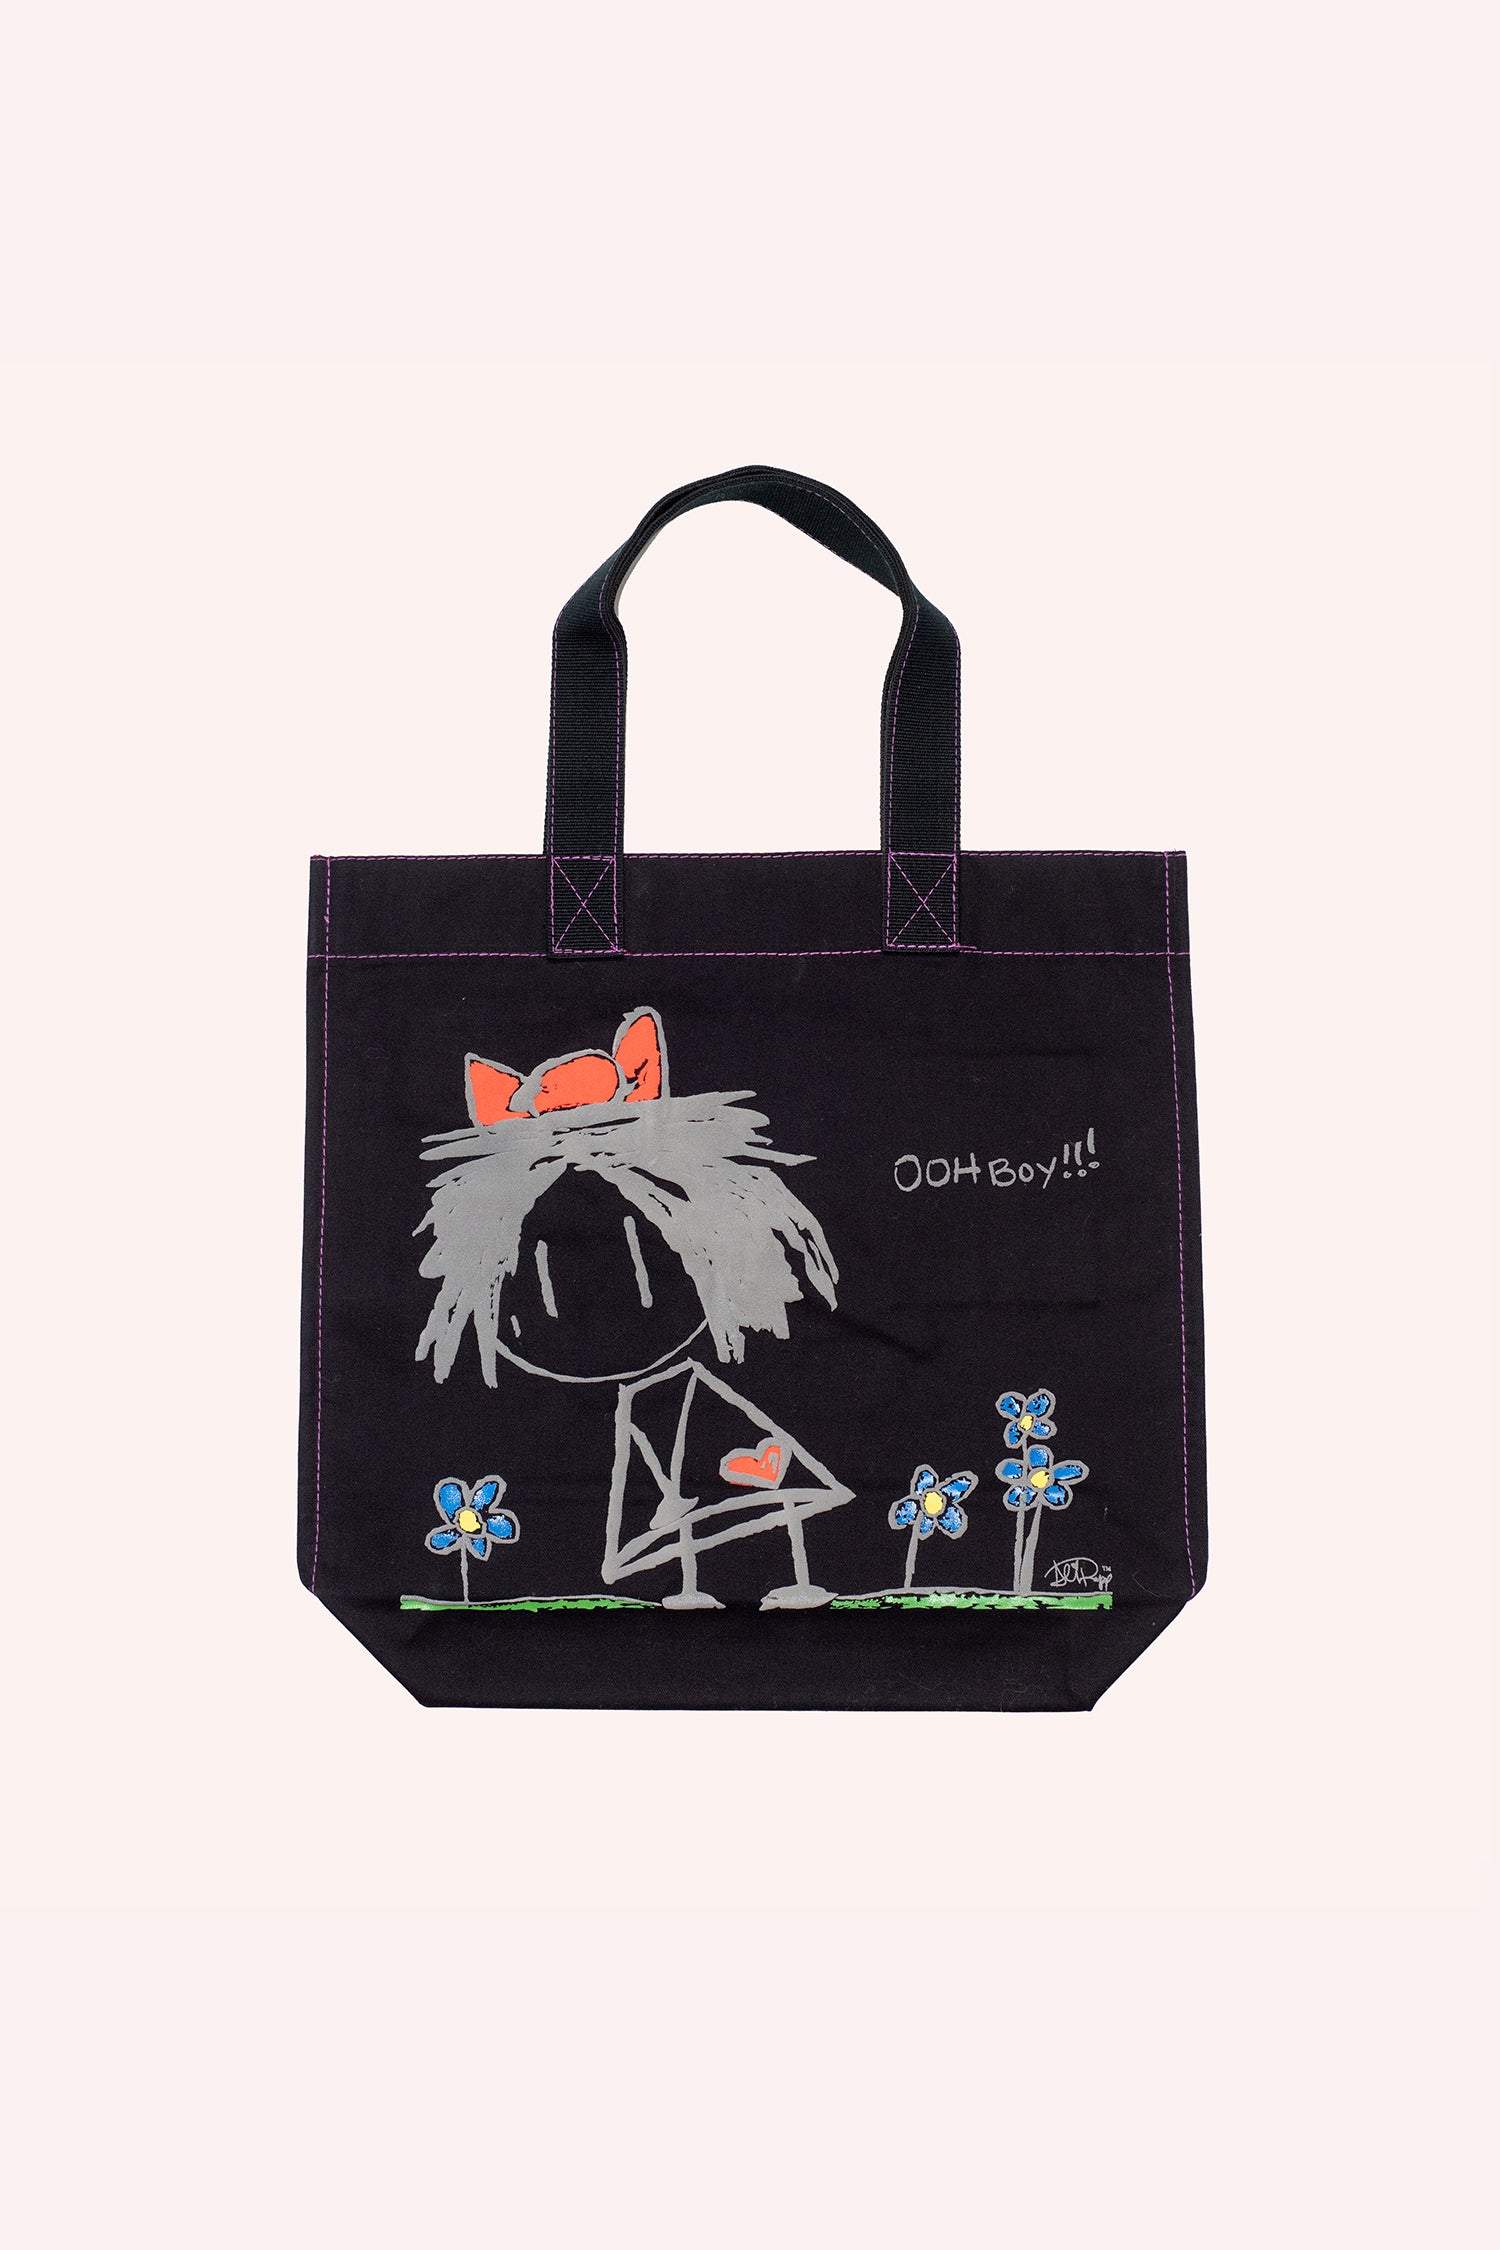 Tote bag, black squared, Ali Rapp artwork Happy girl, red ribbon in hair, blue flowers, Ooh Boy!!! quote